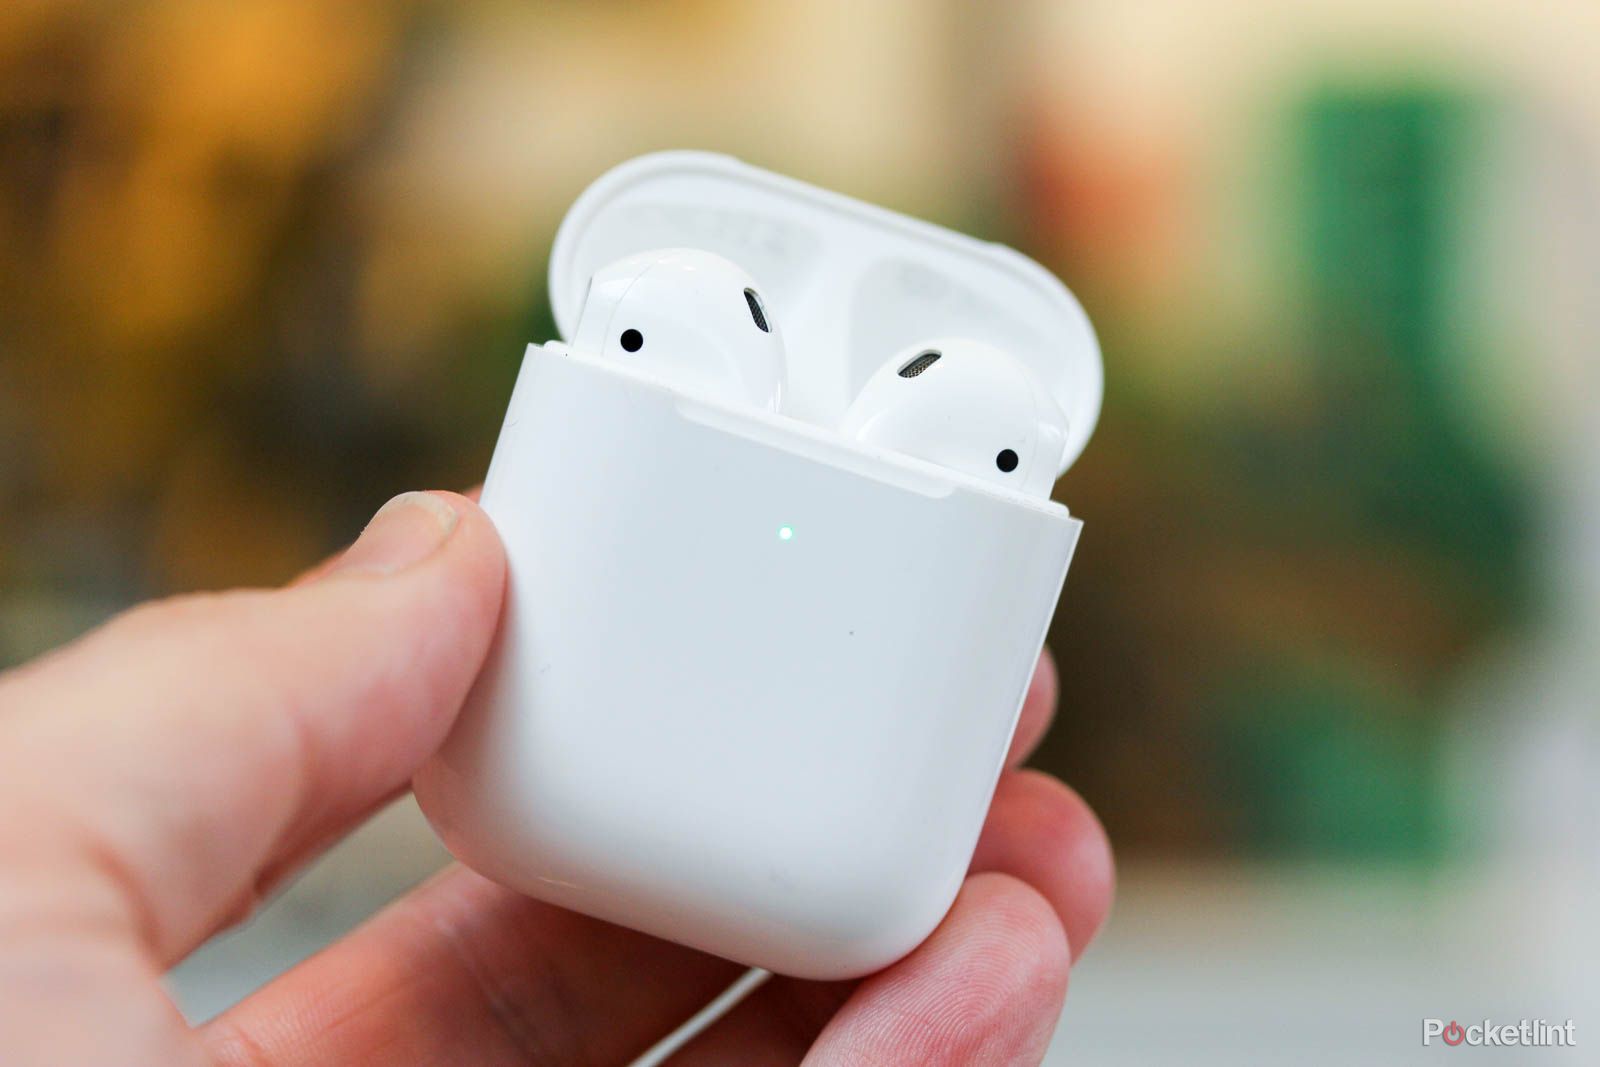 Apple's AirPods 2 with wireless charging case have $30/£40 off photo 1